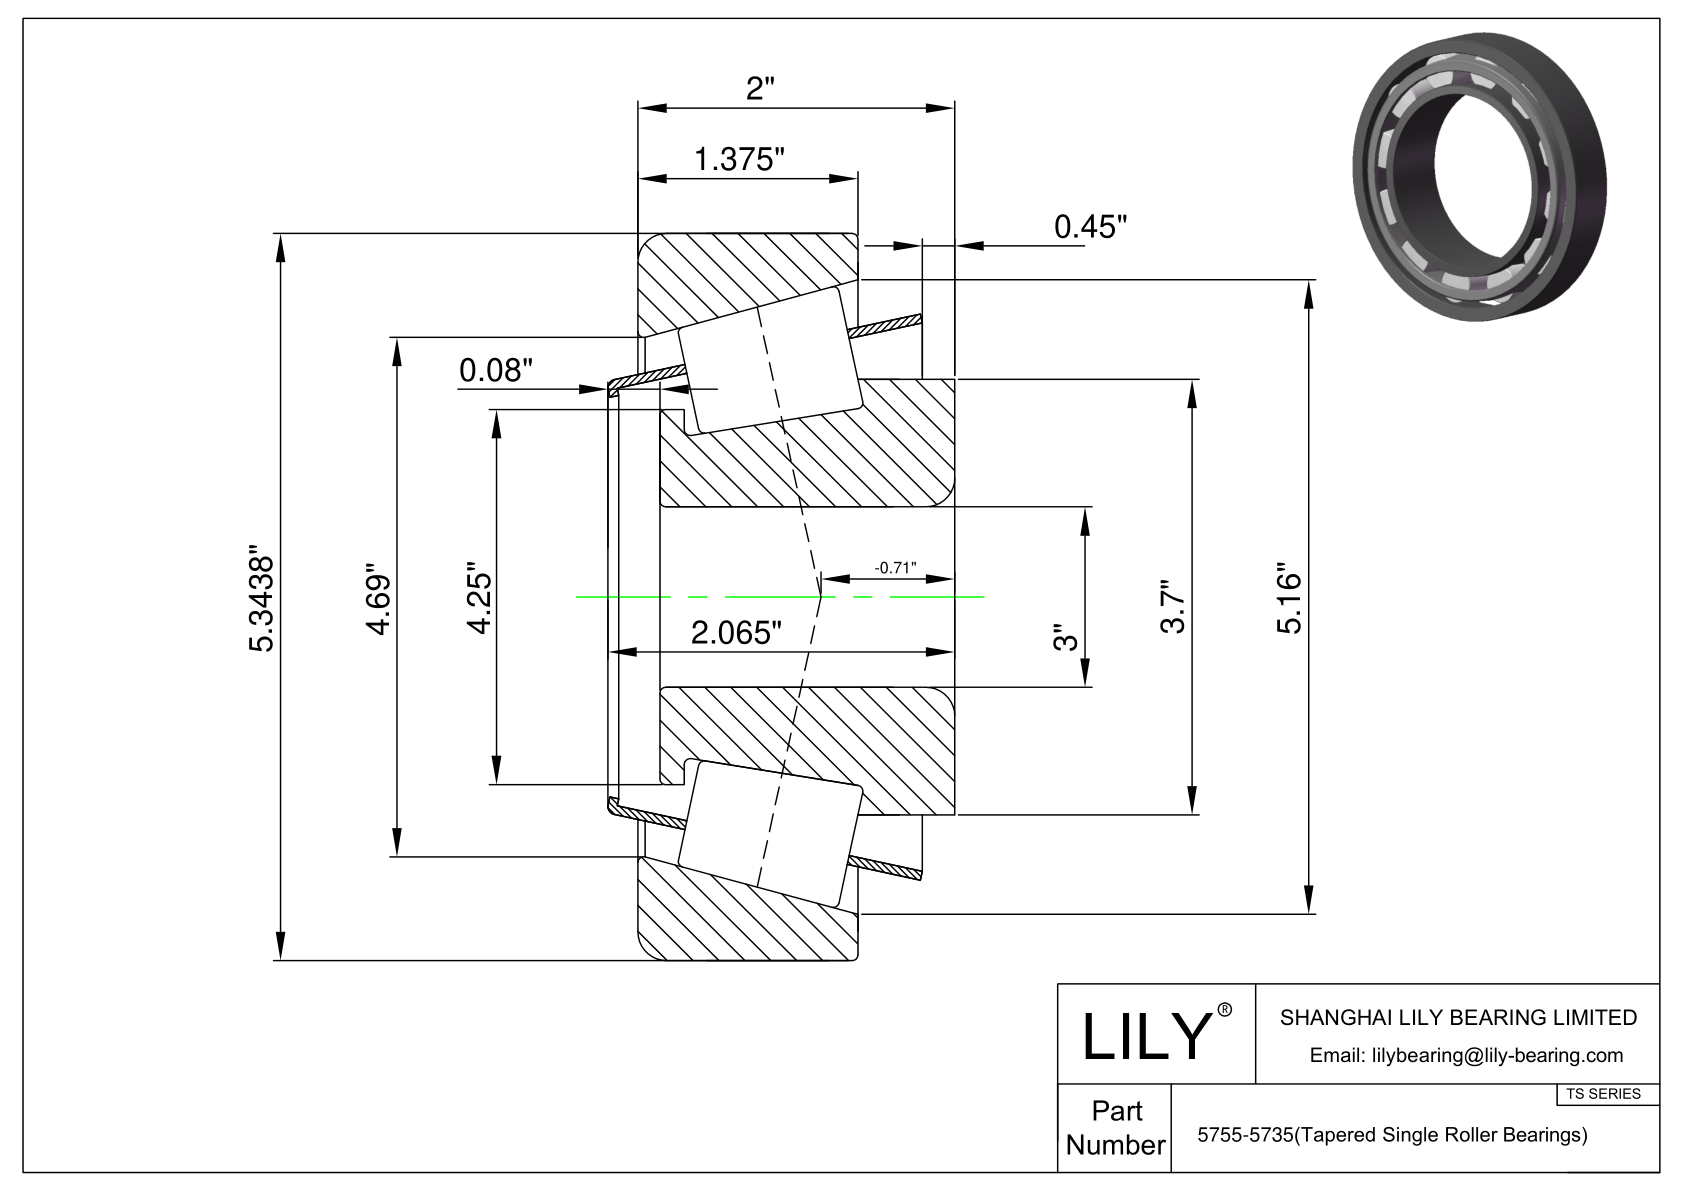 5755-5735 TS (Tapered Single Roller Bearings) (Imperial) cad drawing